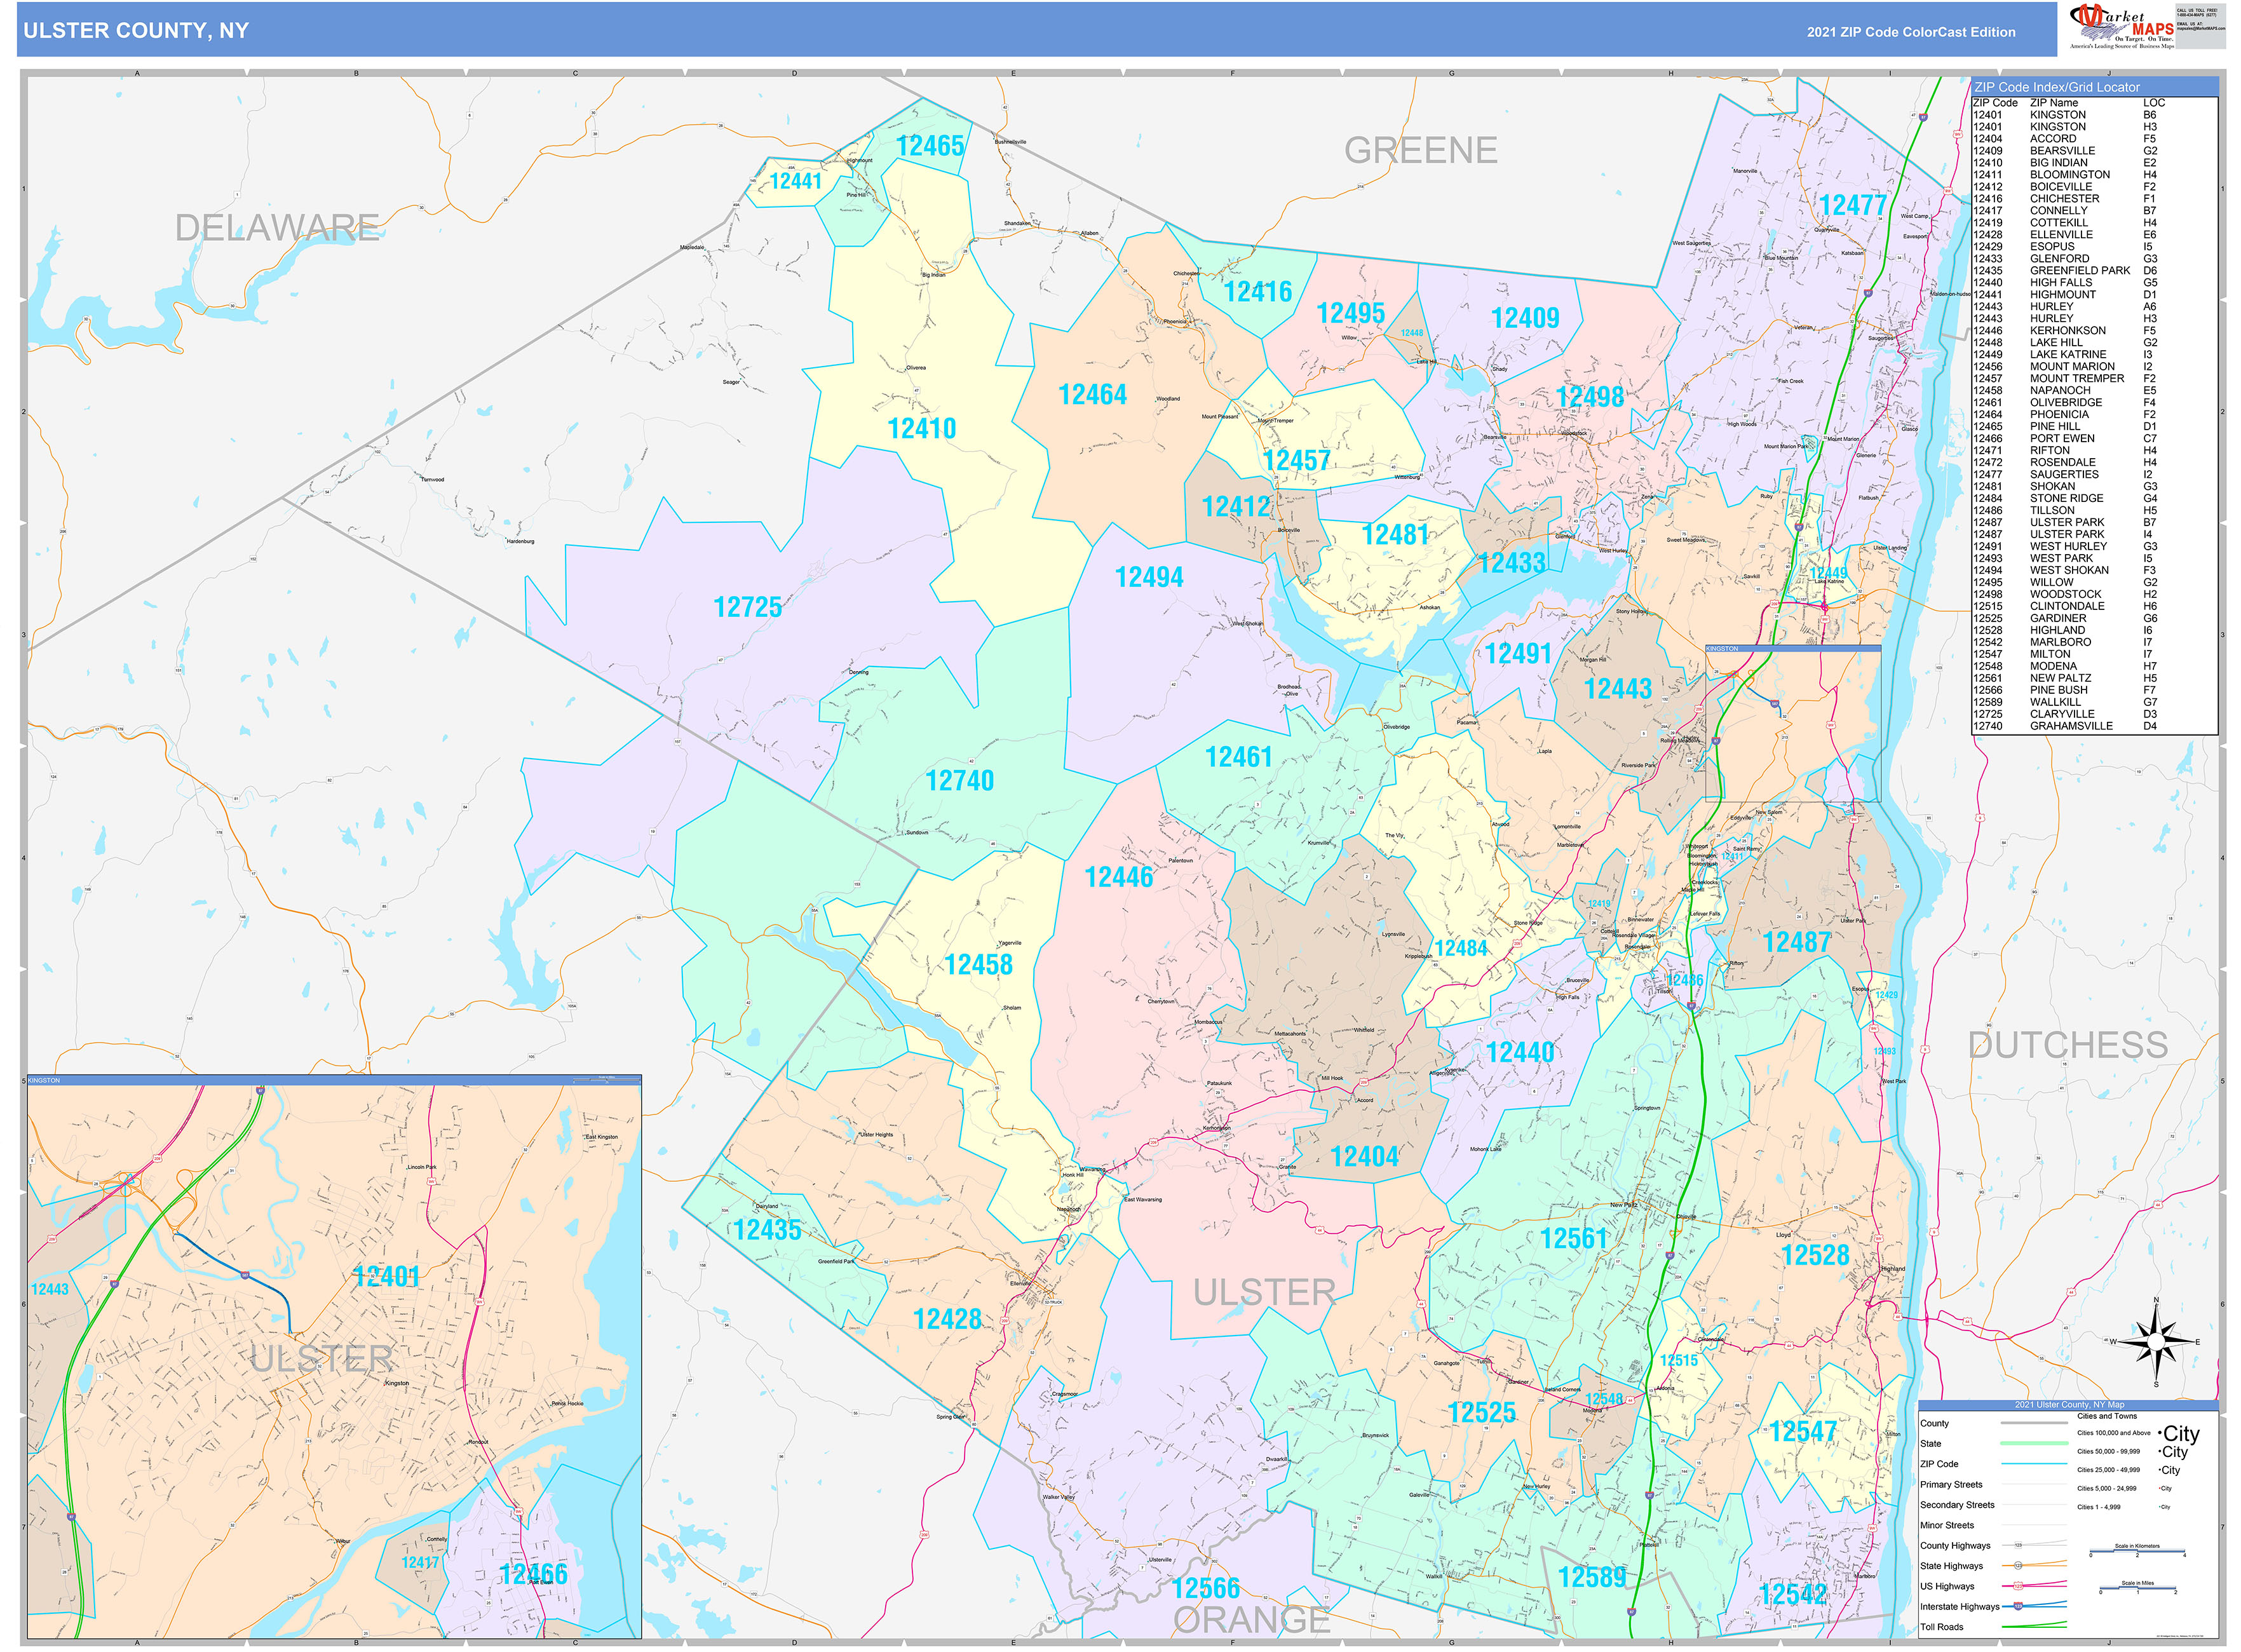 Ulster County Ny Wall Map Premium Style By Marketmaps | Images and ...